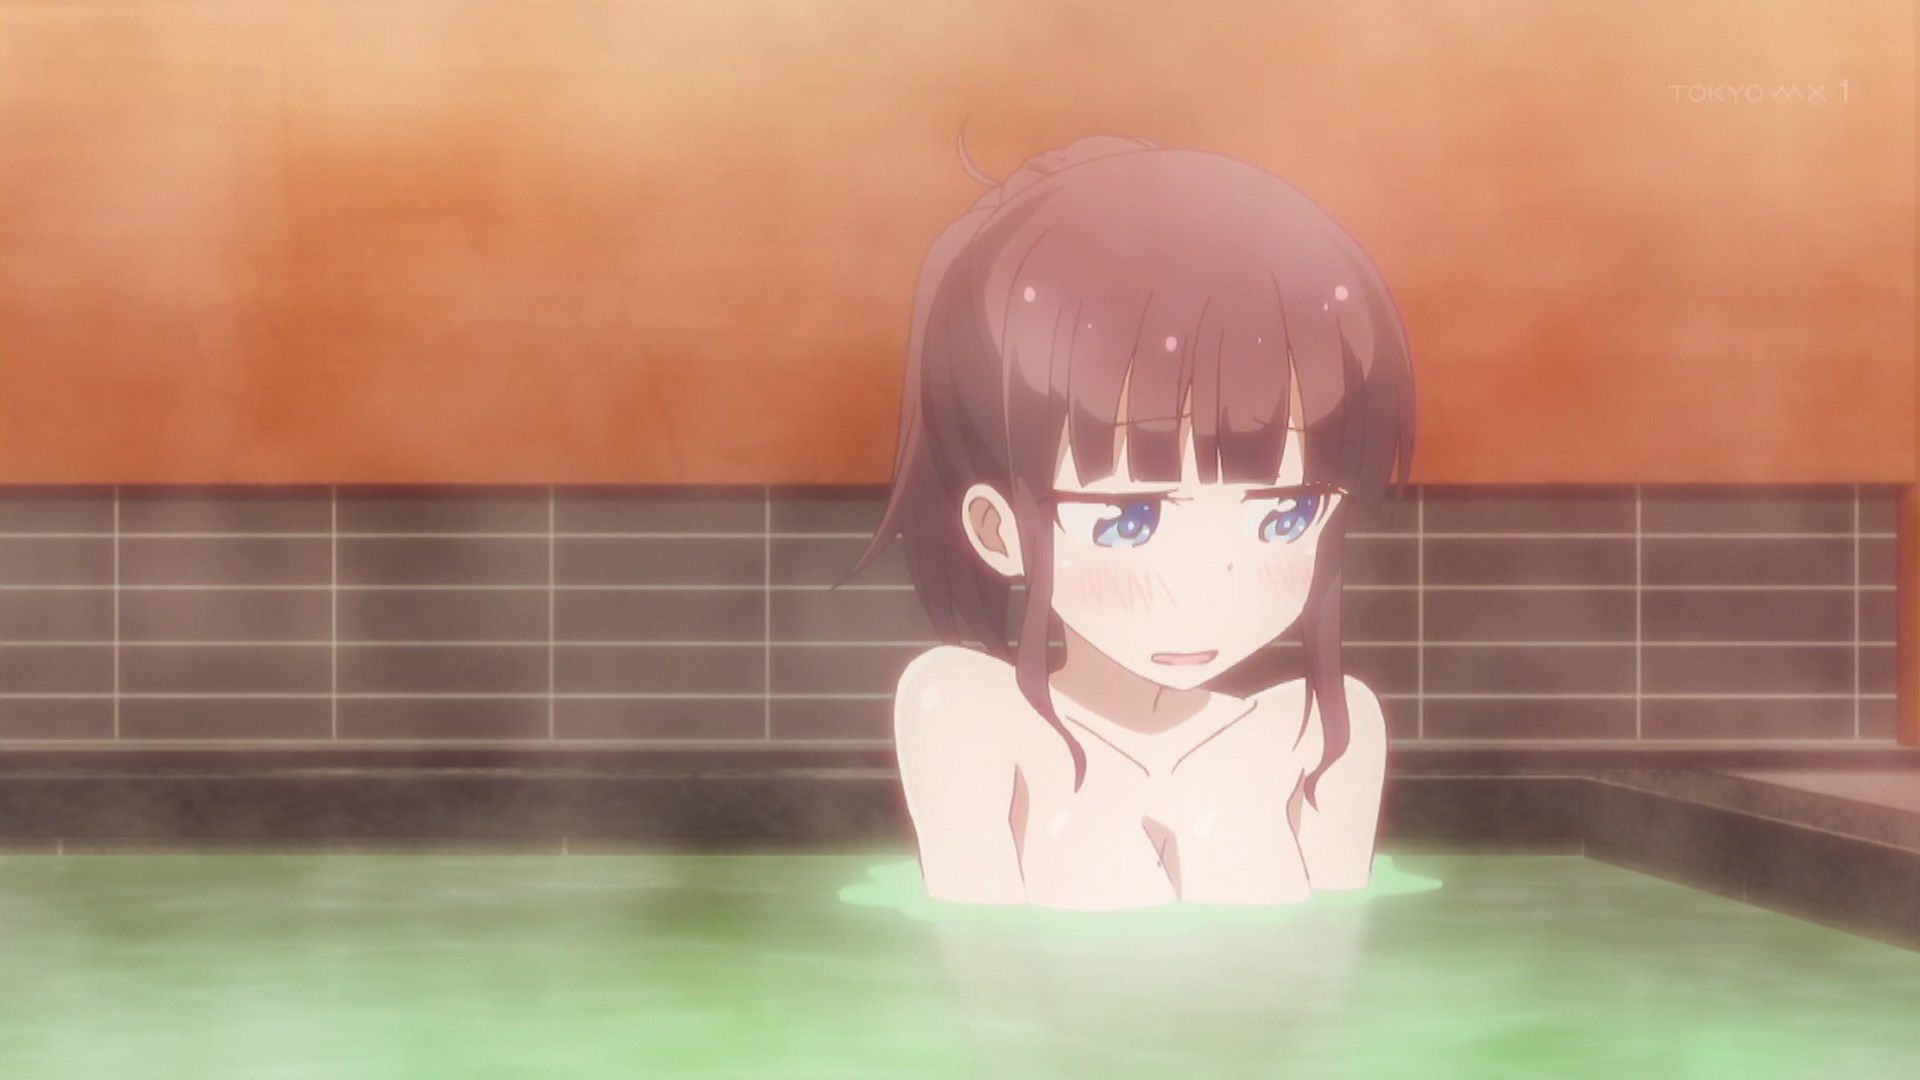 [Artificial mouth times] "NEW GAME! "Of all nine episodes, Yuri hifumi nude too たまらな of wwwwwwwww 15